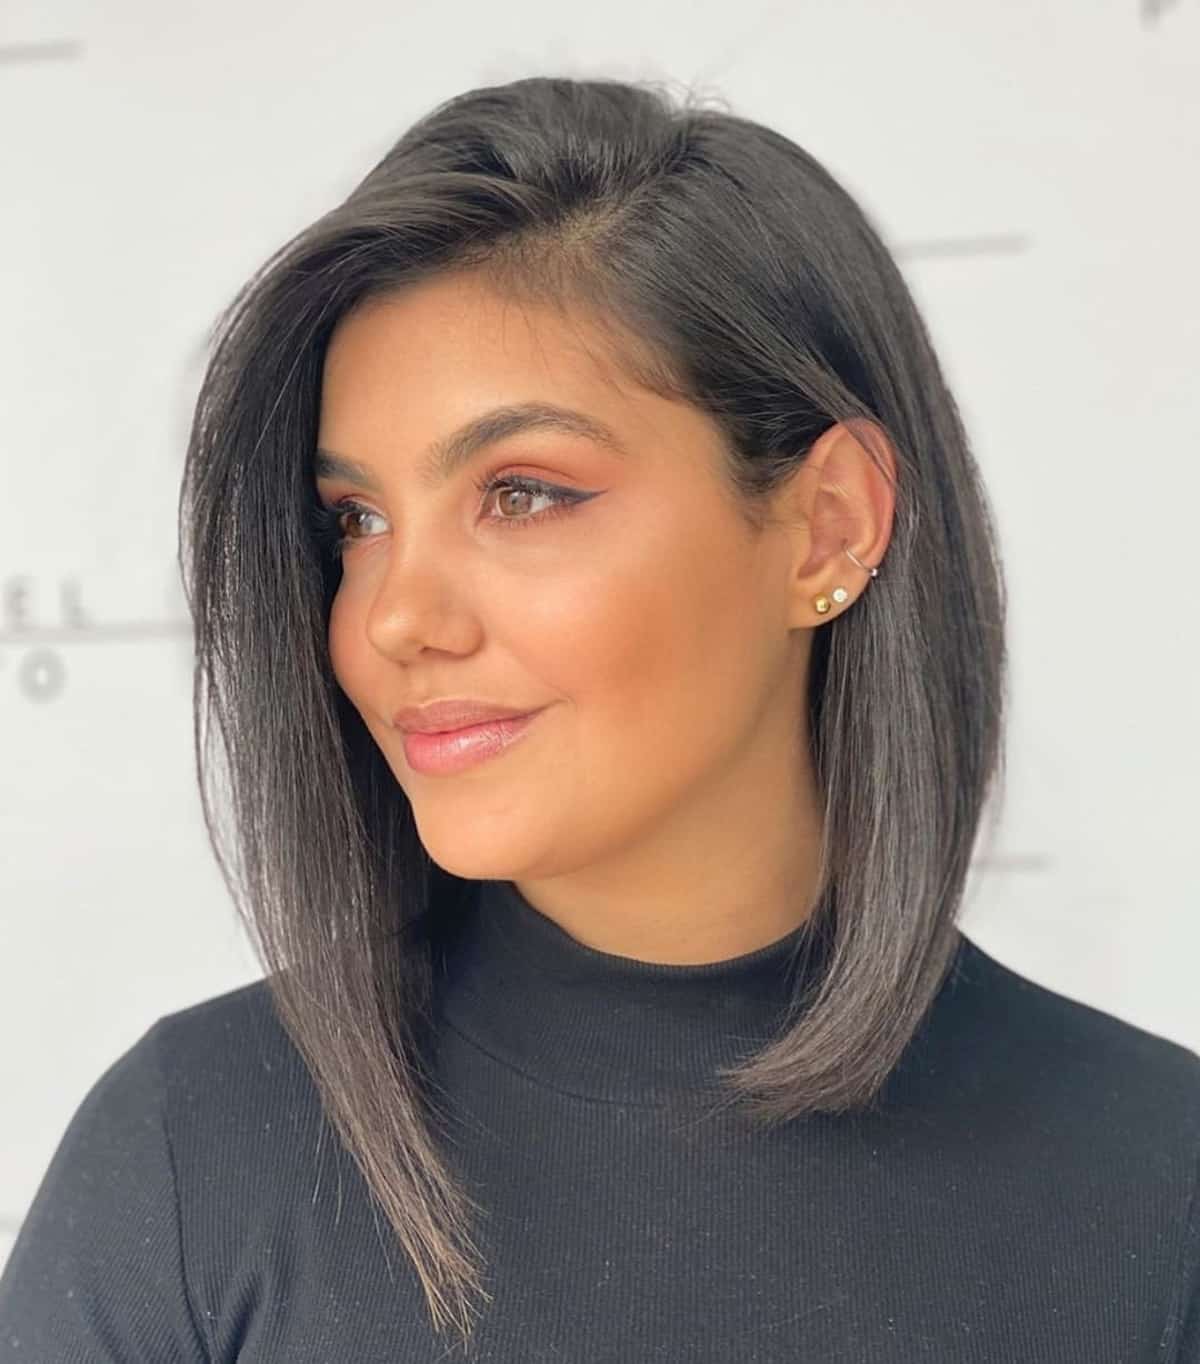 28 Incredible Lob Haircuts You Have to See